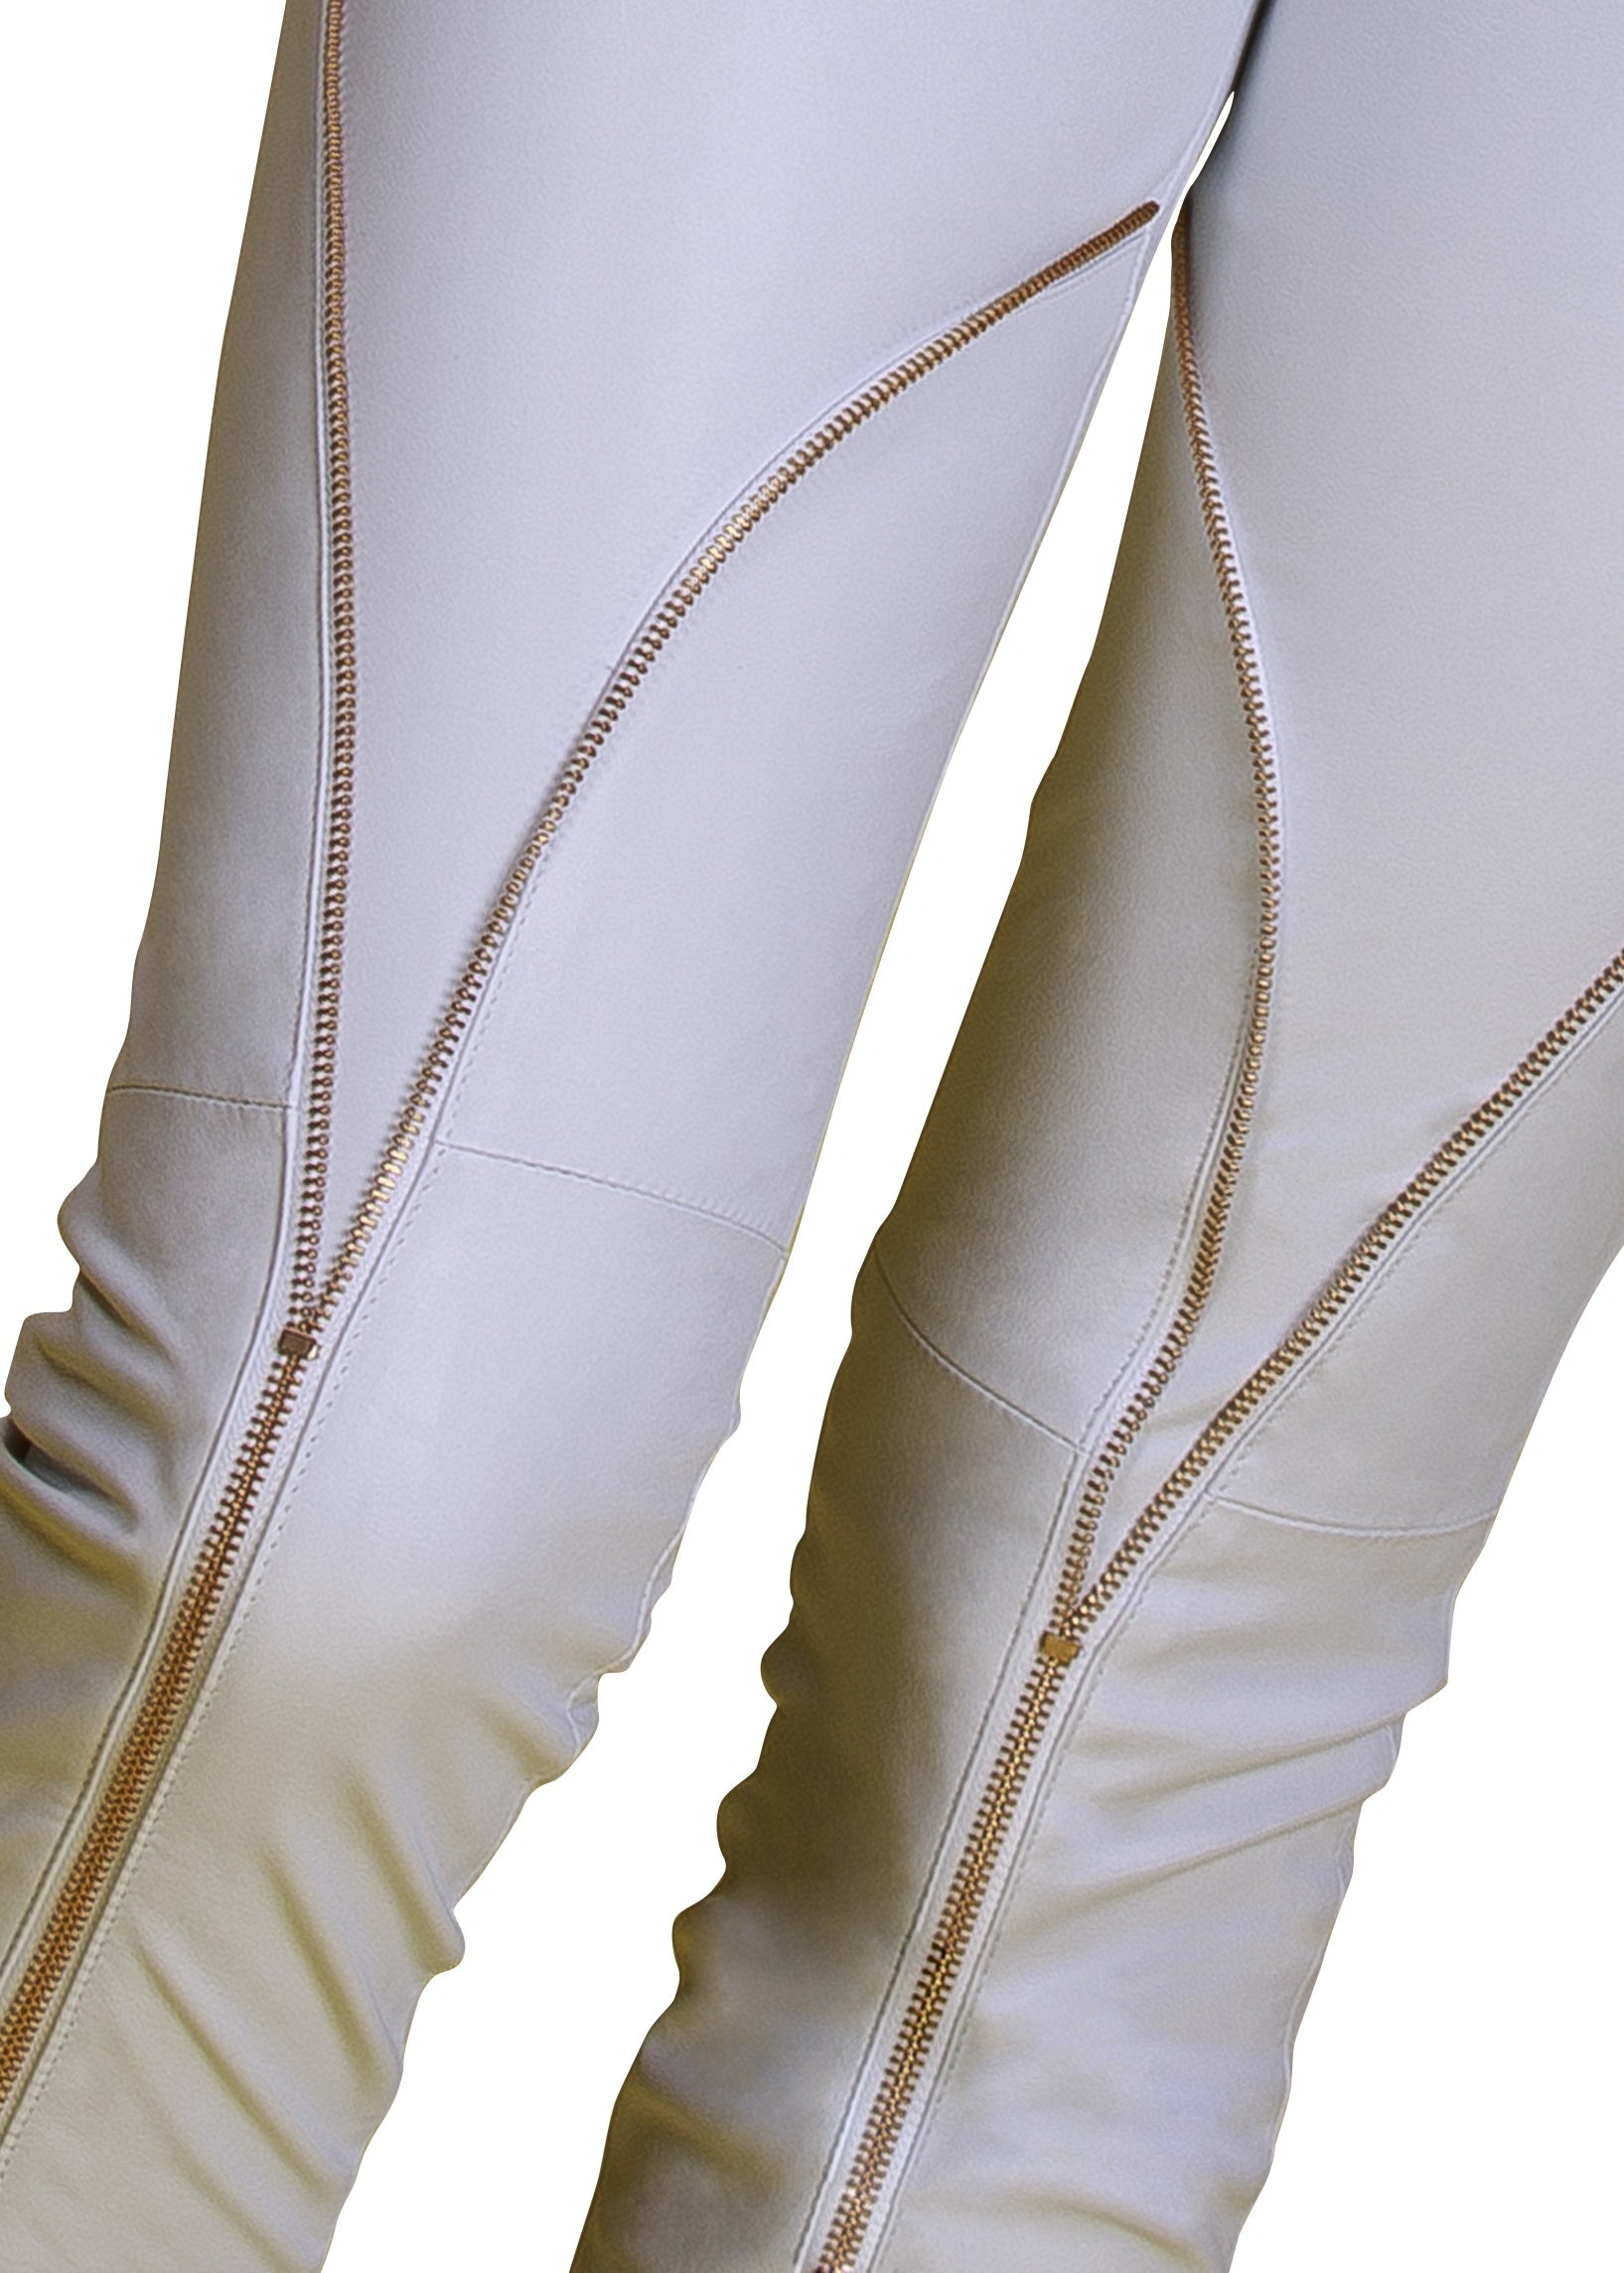 White Leather Pants with Zippers - Svanlund Design